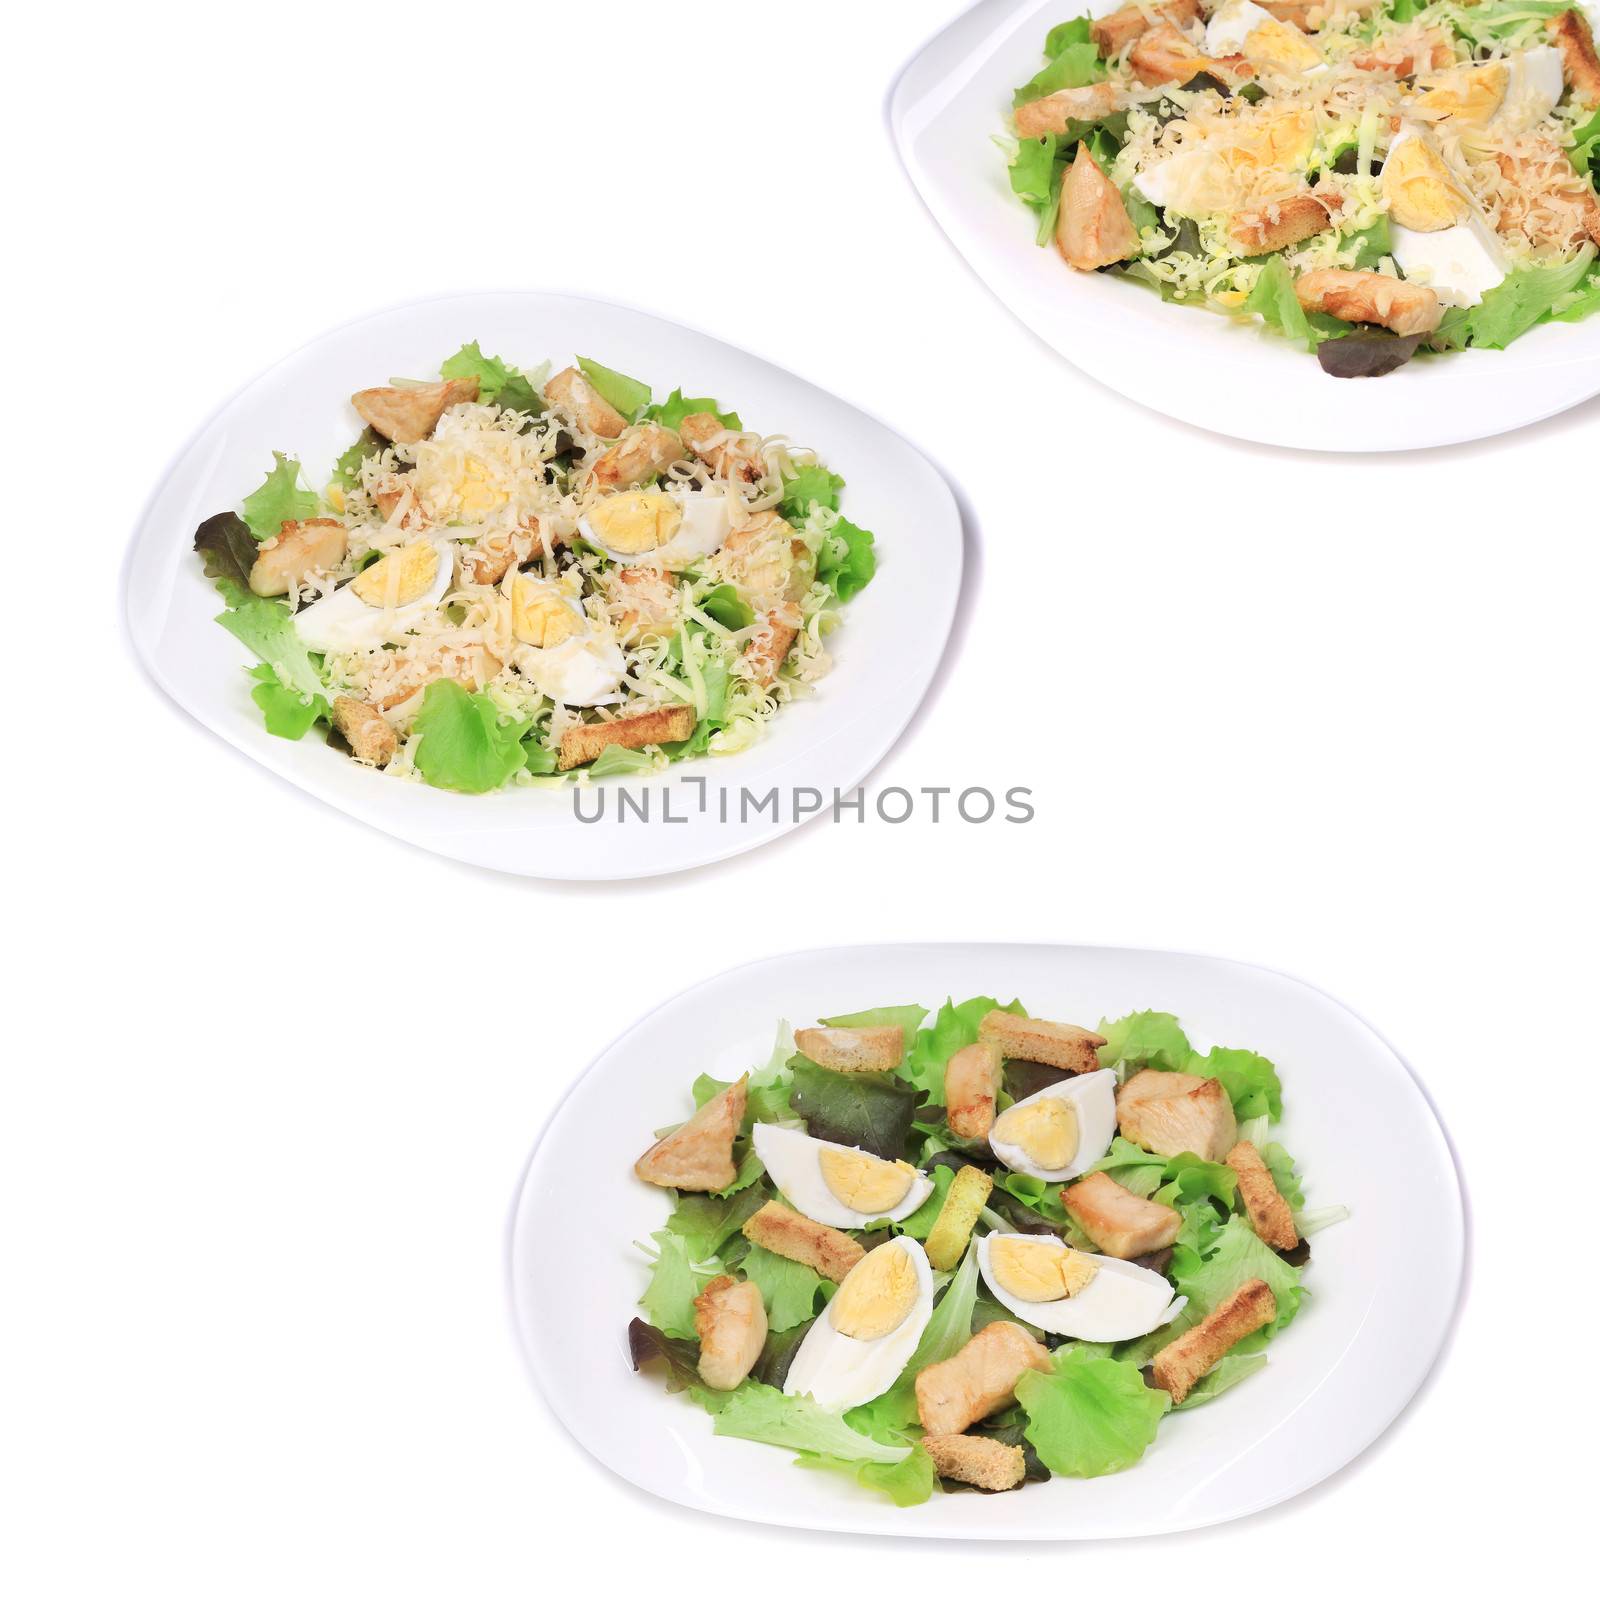 Caesar salad collage. Isolated on a white background.